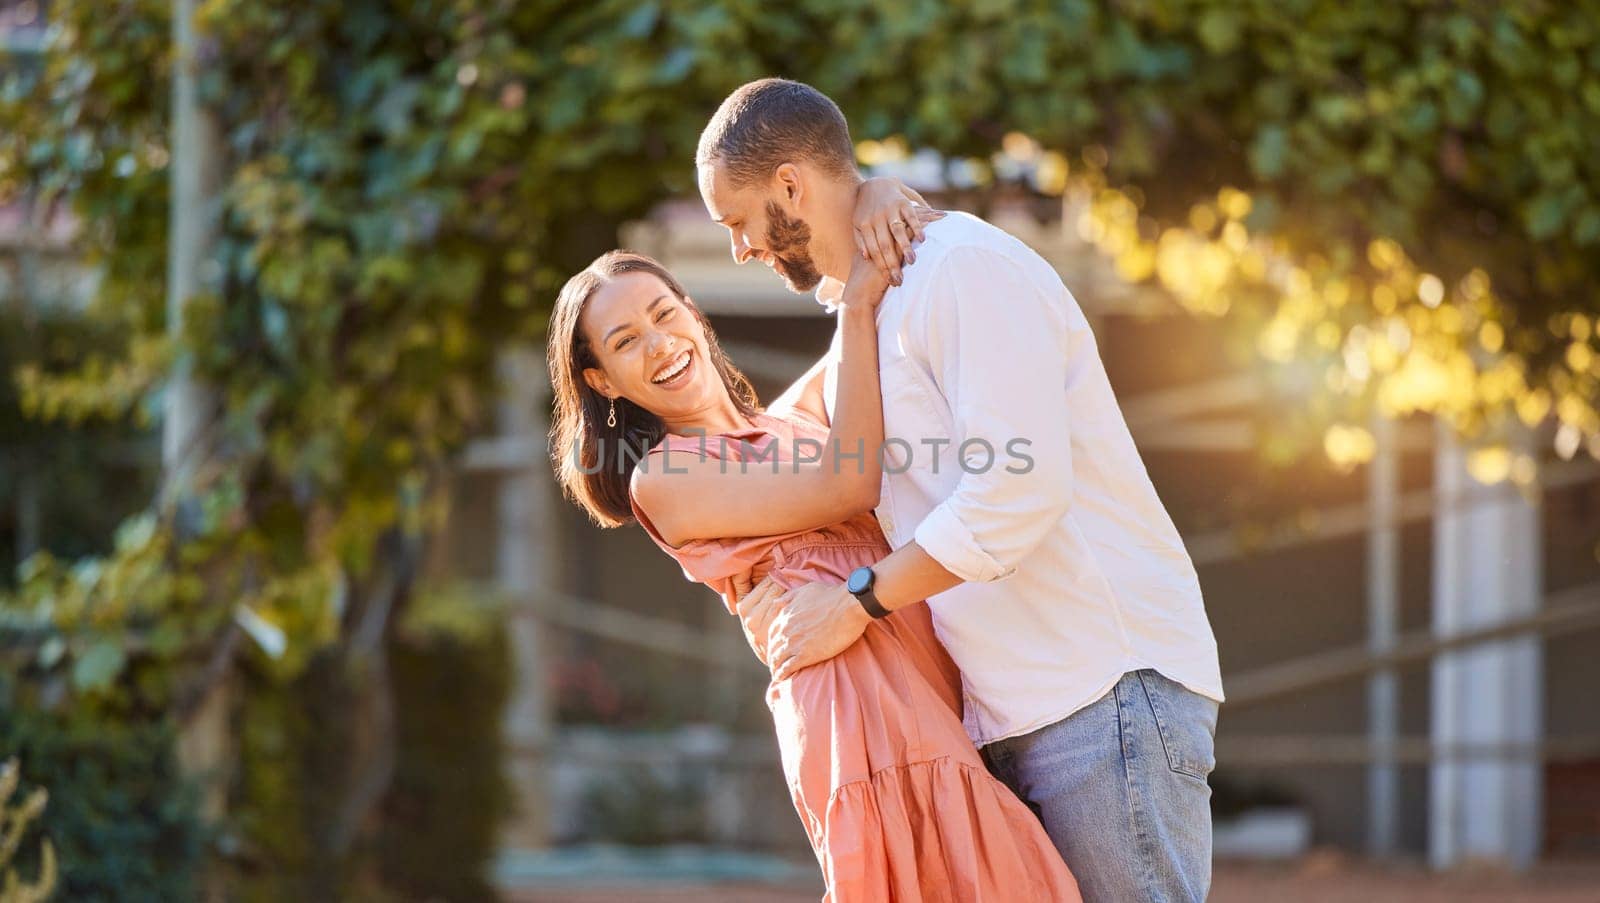 Couple, hug and love in nature park, smile and happy together with relationship and romance on outdoor date. Bonding, care and romantic, man holding woman and spending quality time outside. by YuriArcurs